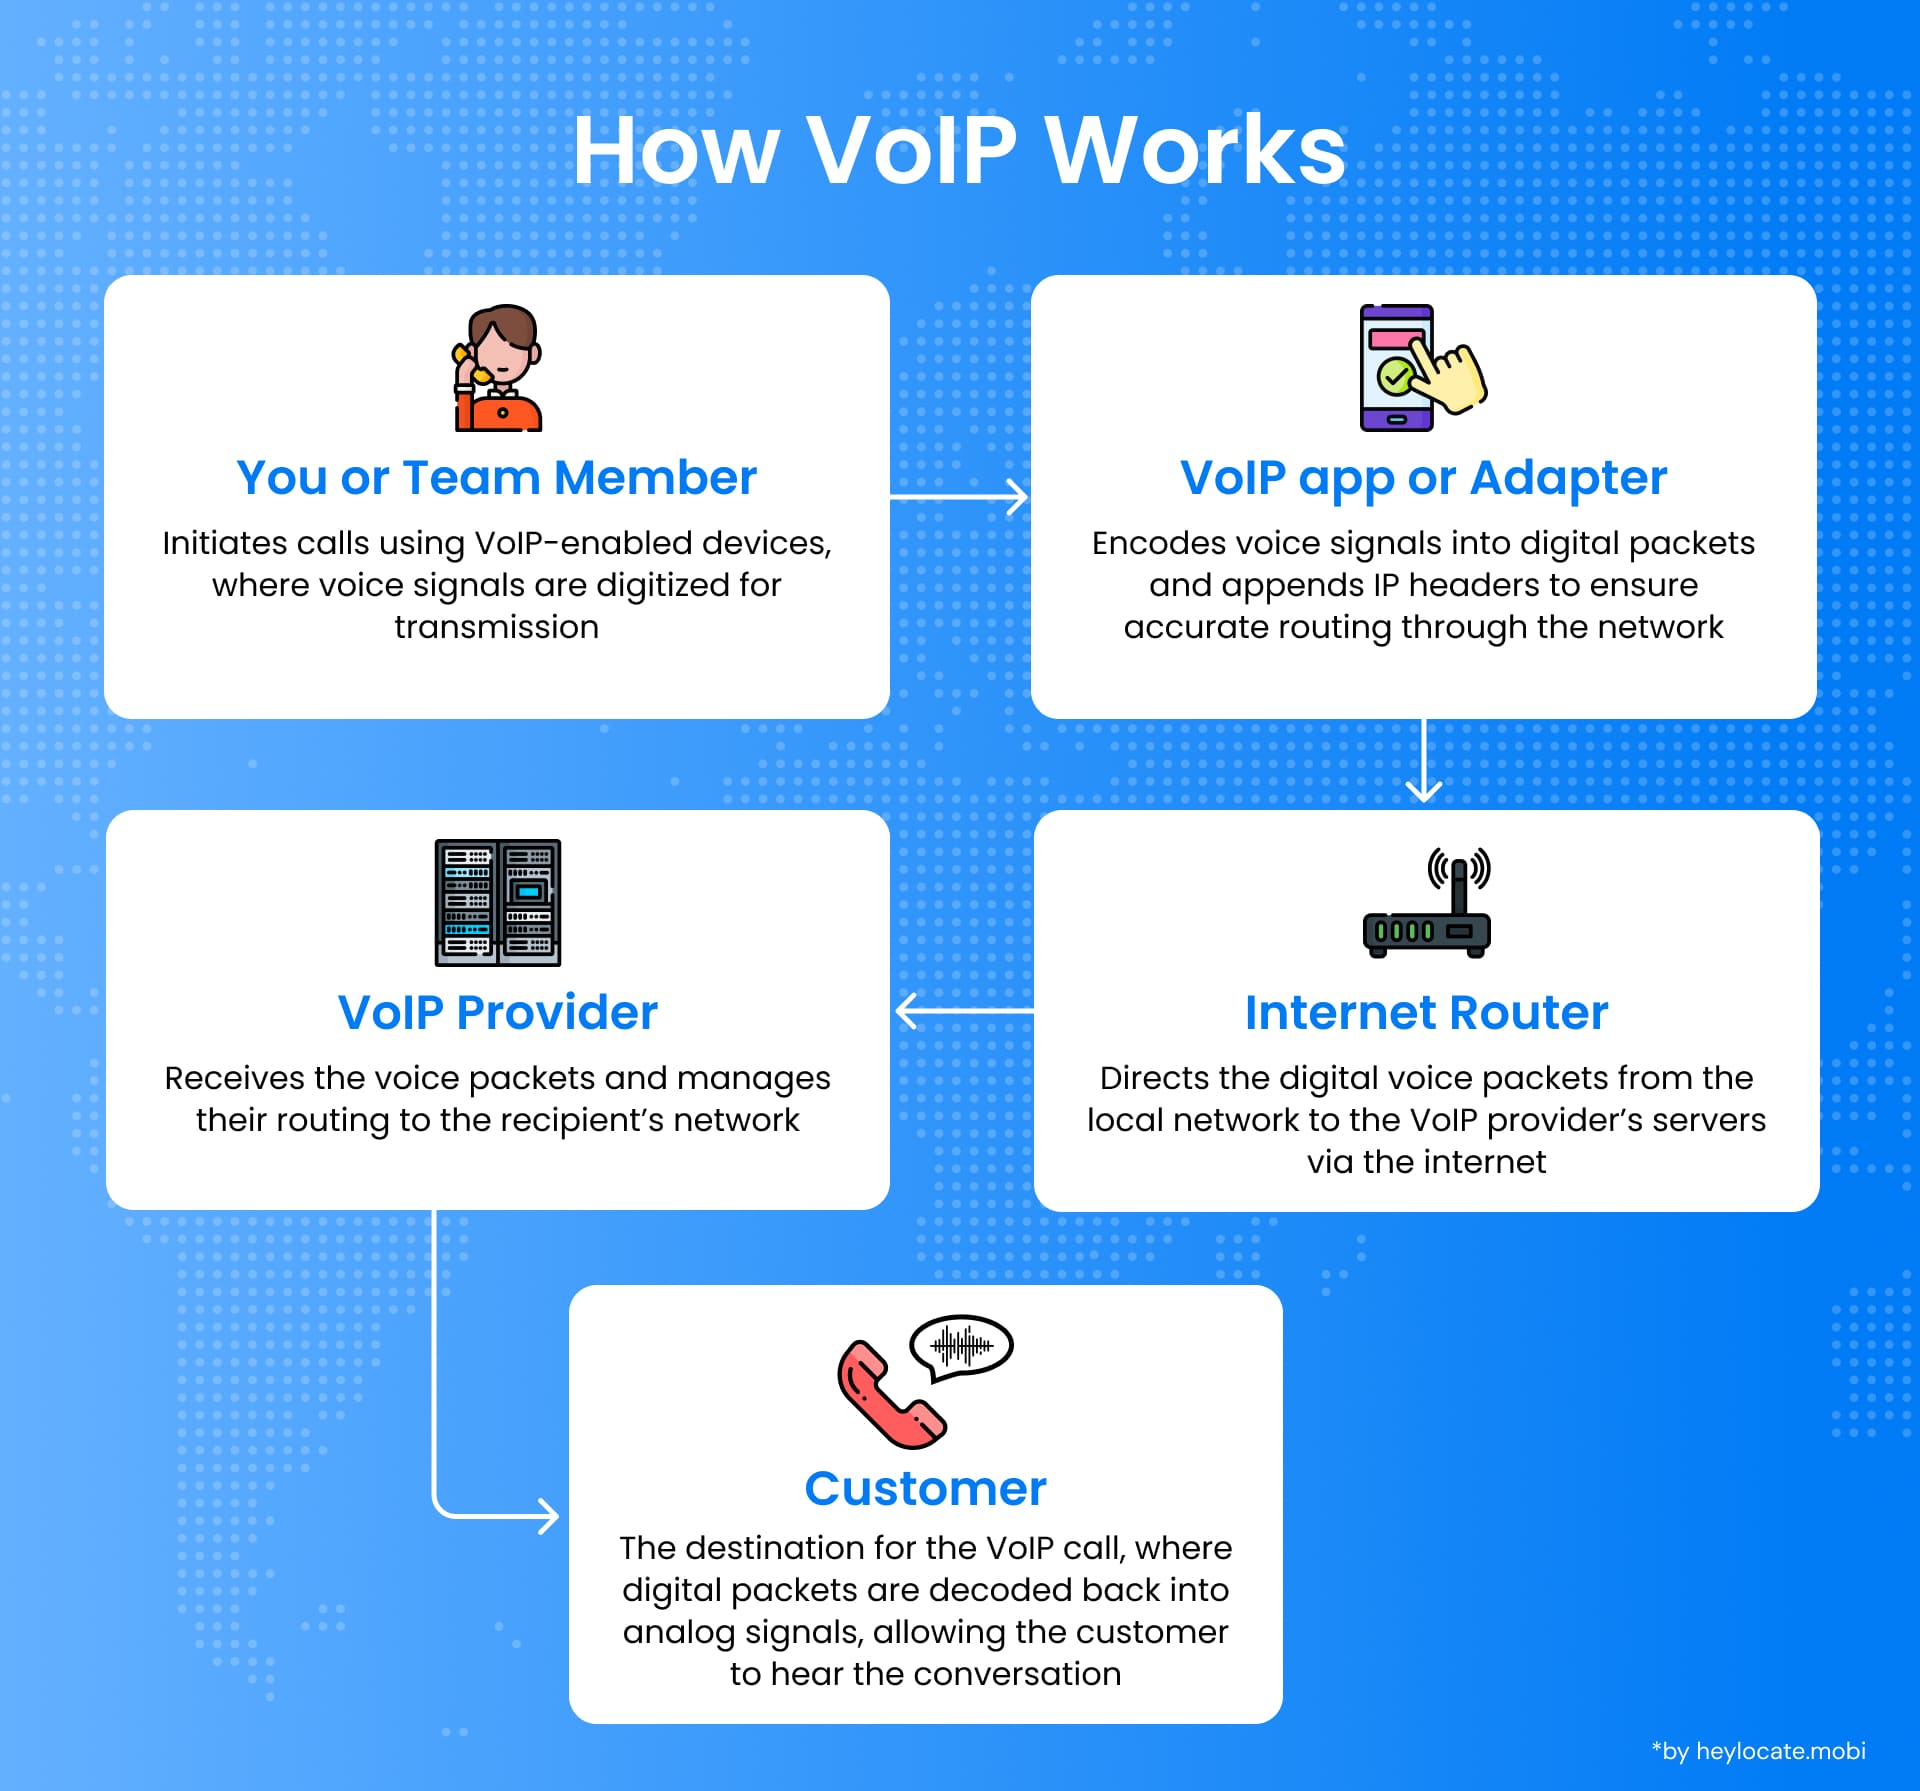 Diagram illustrating the process of a Voice over Internet Protocol (VoIP) call. It shows the user initiating the call, the VoIP app or adapter encoding the voice signals, the transmission of data through an internet router, management by the VoIP provider, and the final reception by the customer.